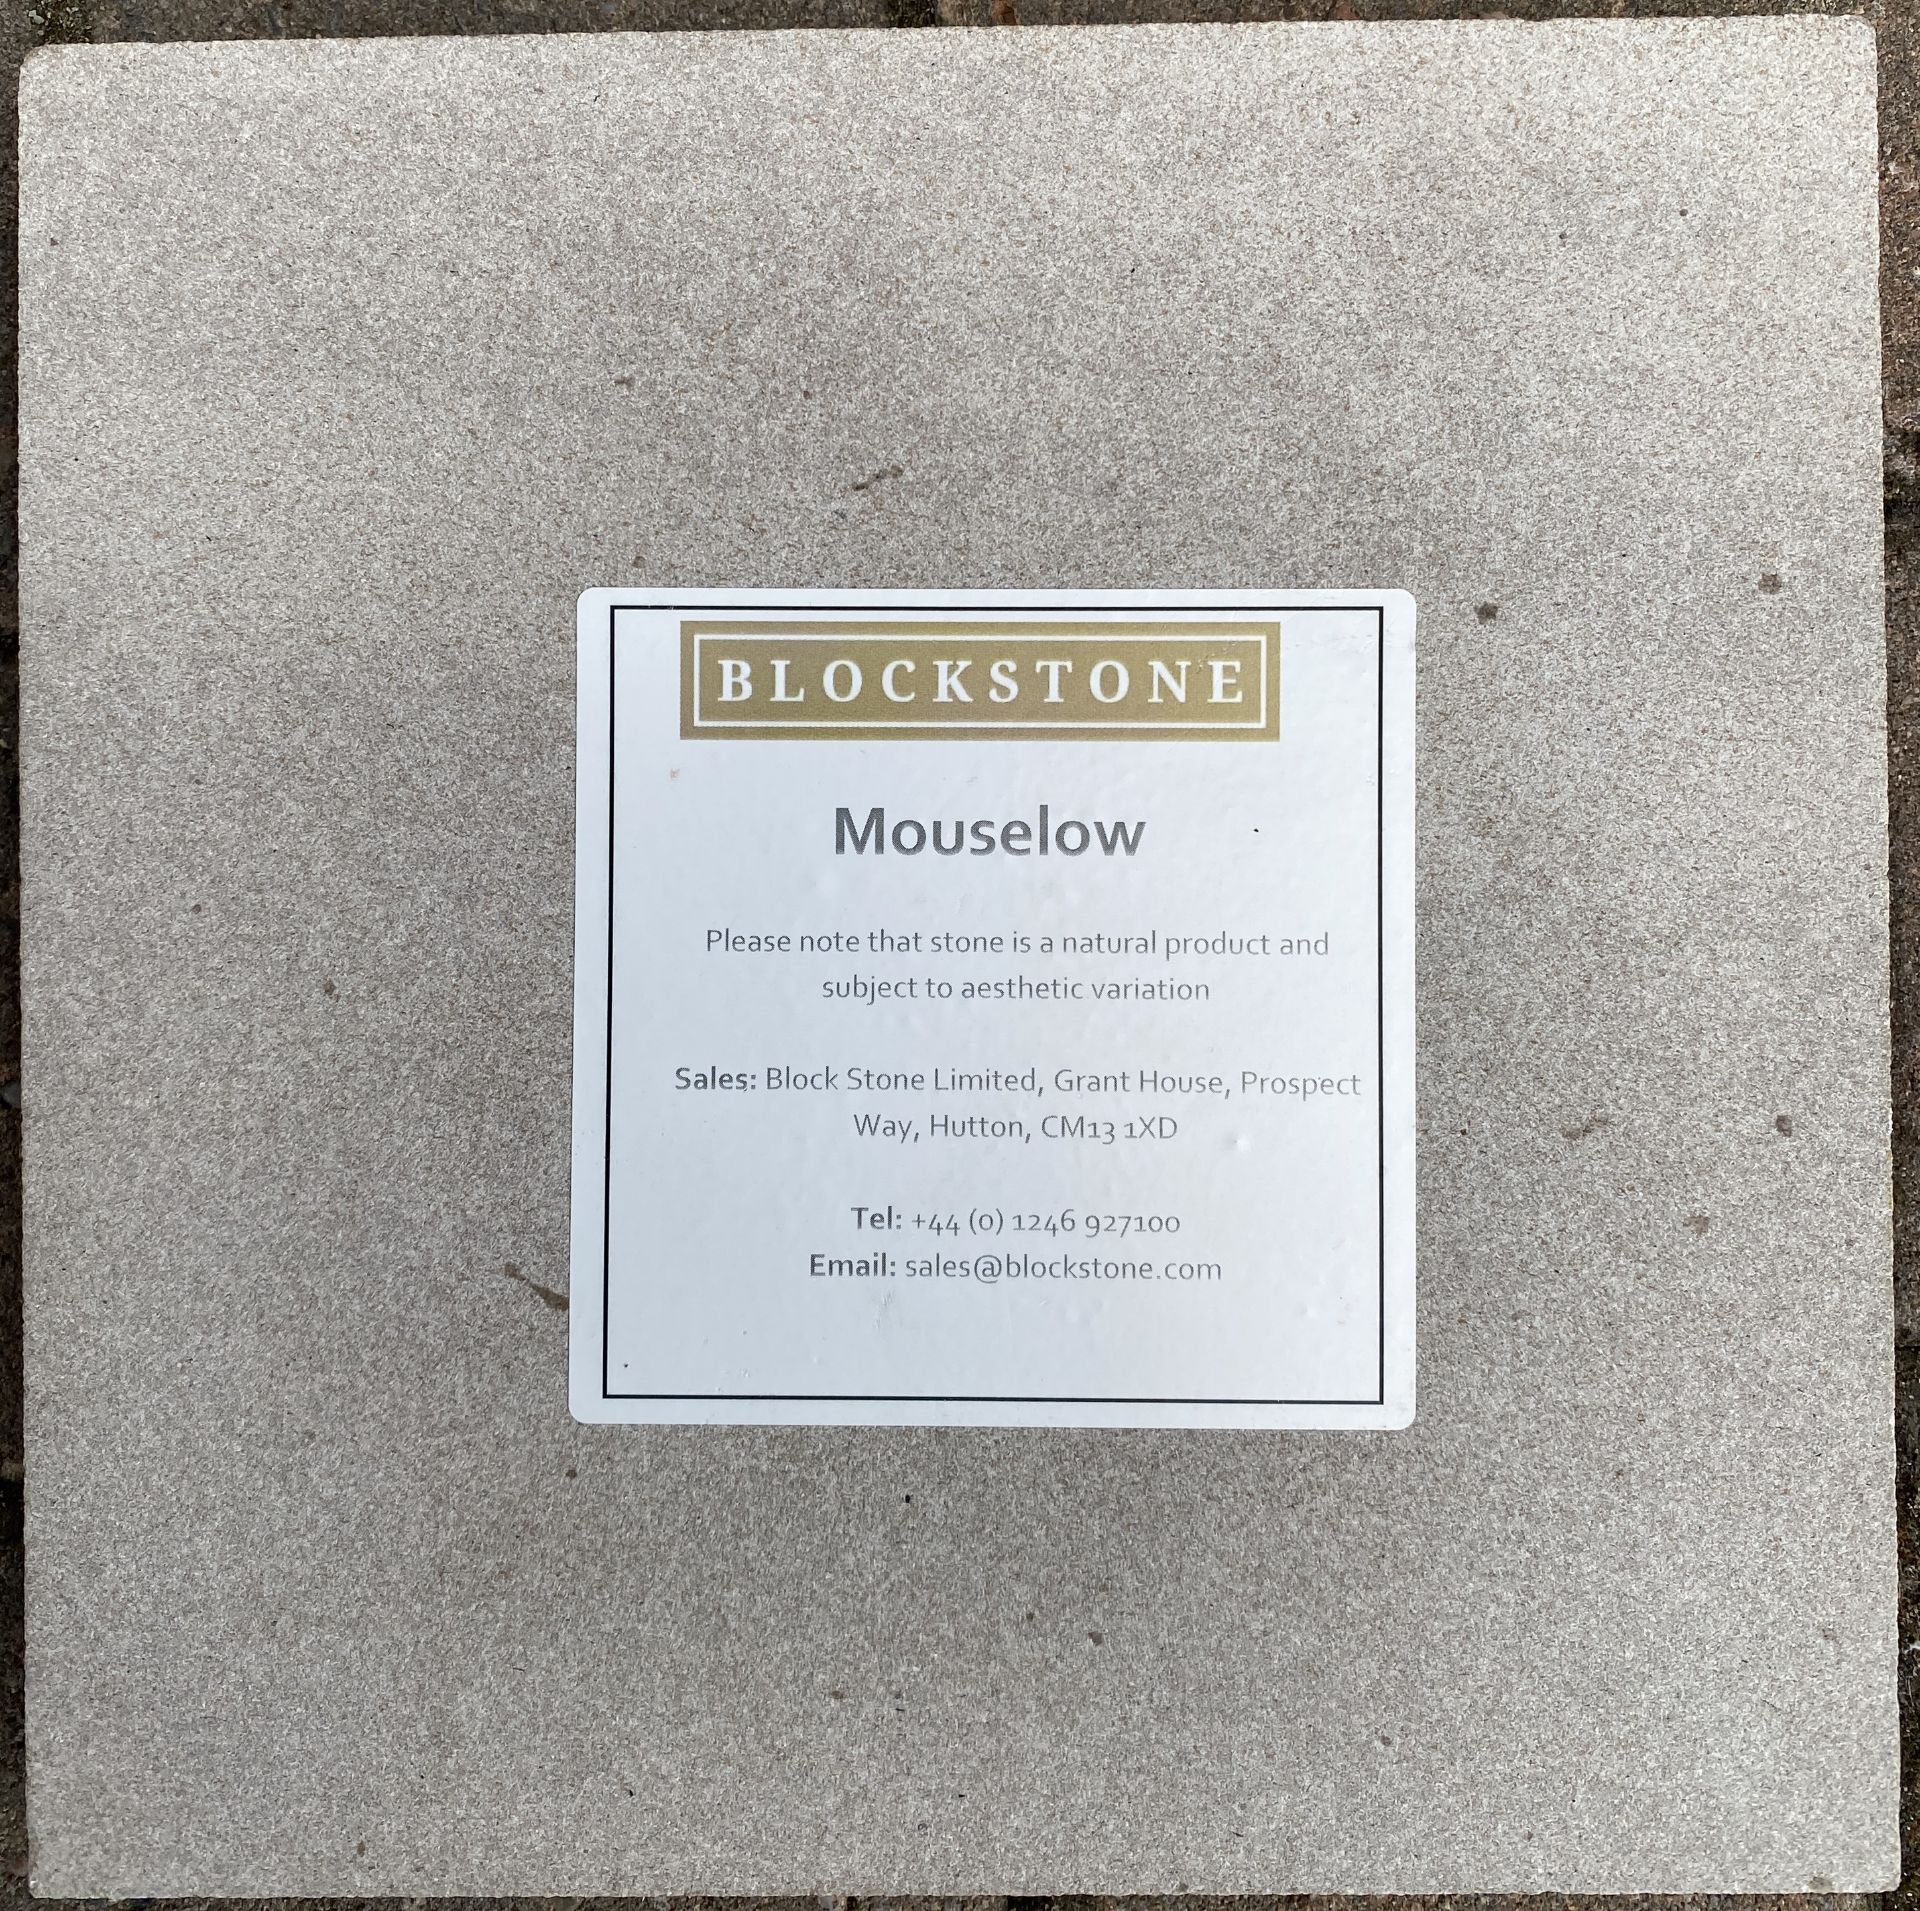 Contents to 3 pallets of BLOCKSTONE MOUSELOW NATURAL SANDSTONE, RUBBED FINISH FACING/PATIO STONE. - Image 7 of 8